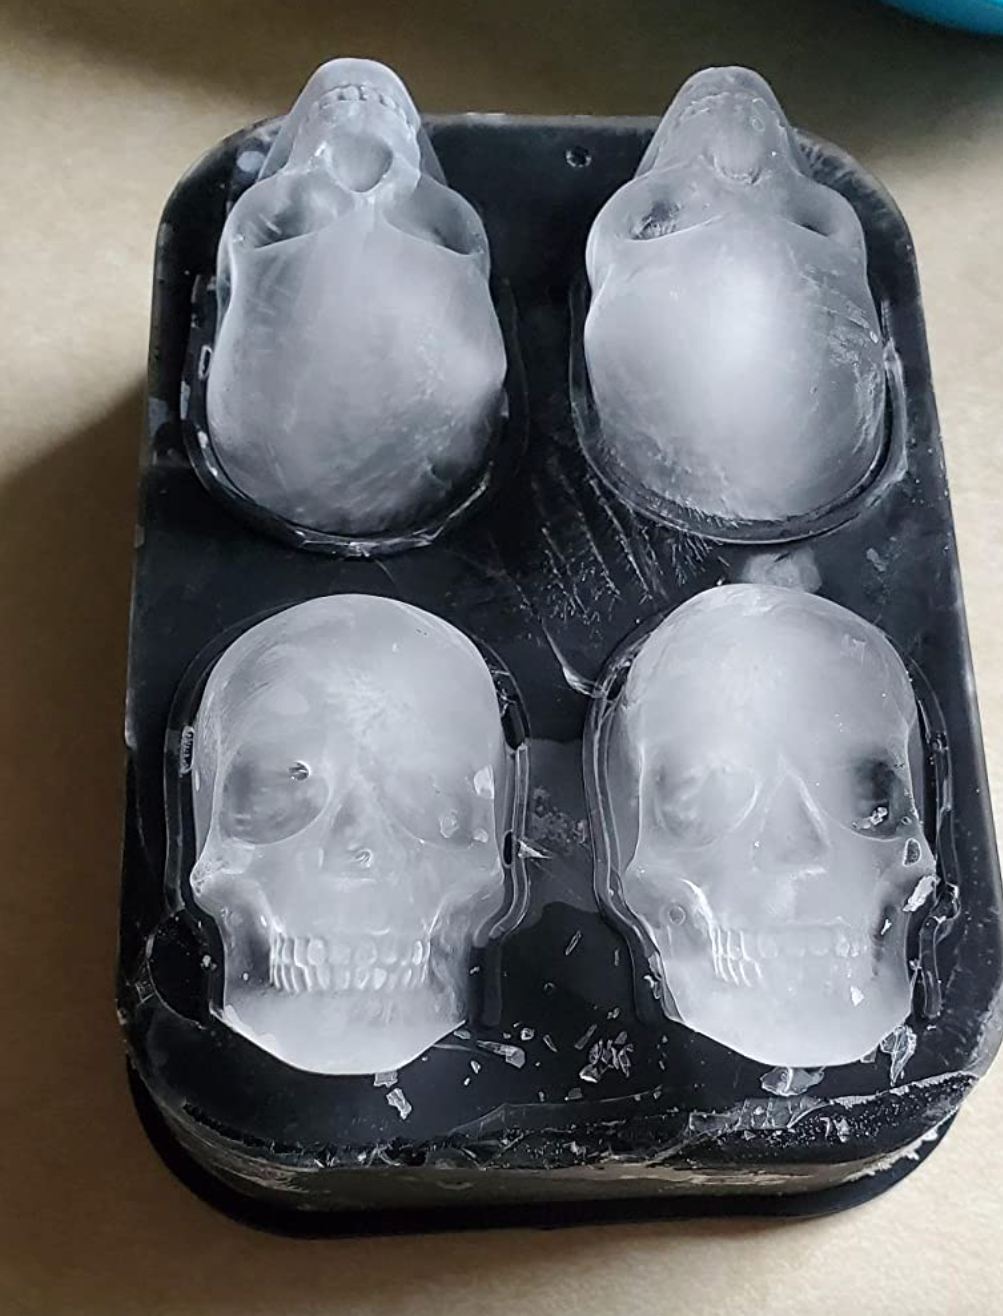 1/2pcs Ghost Ice Tray Molds, Funny Ice Cube Mold, Ice Cube Trays Mold To  Make Lovely 3D Drink Ice, Coffee, Juice, Cocktail, Soap, Candle, Chocolate  Re